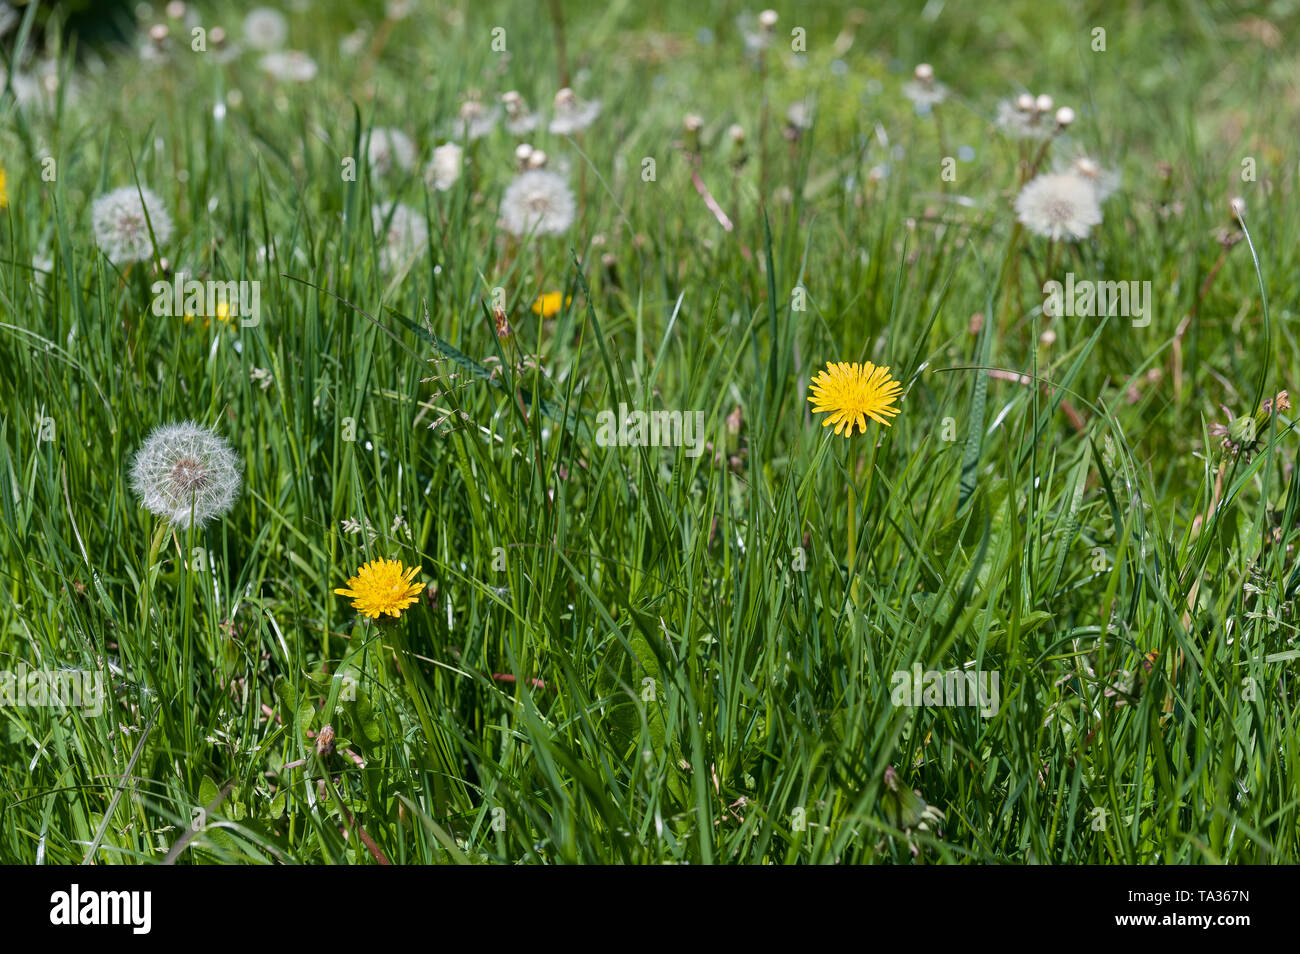 The bright yellow flowers and ‘clock’ seedheads of dandelion, Taraxacum officinalis, grow quickly in a lawn in need of cutting Stock Photo